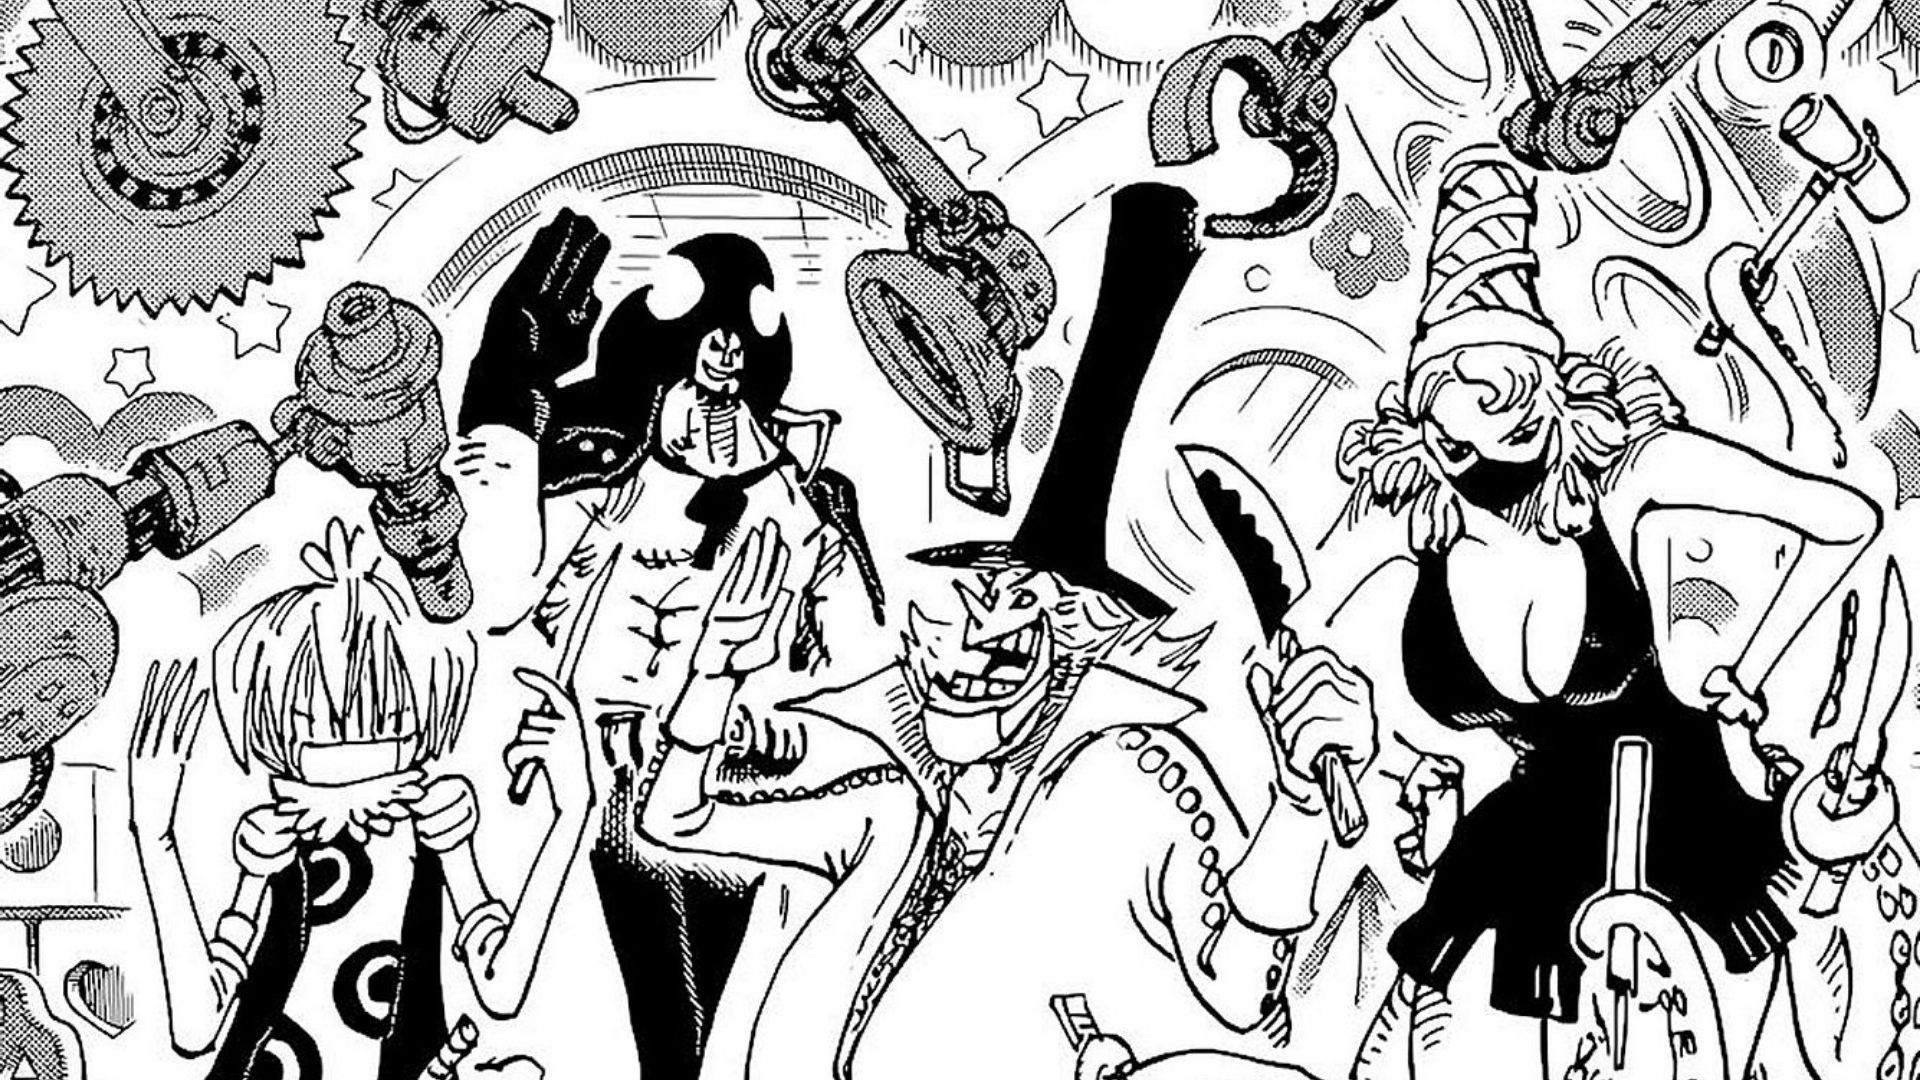 One piece 1044 release date